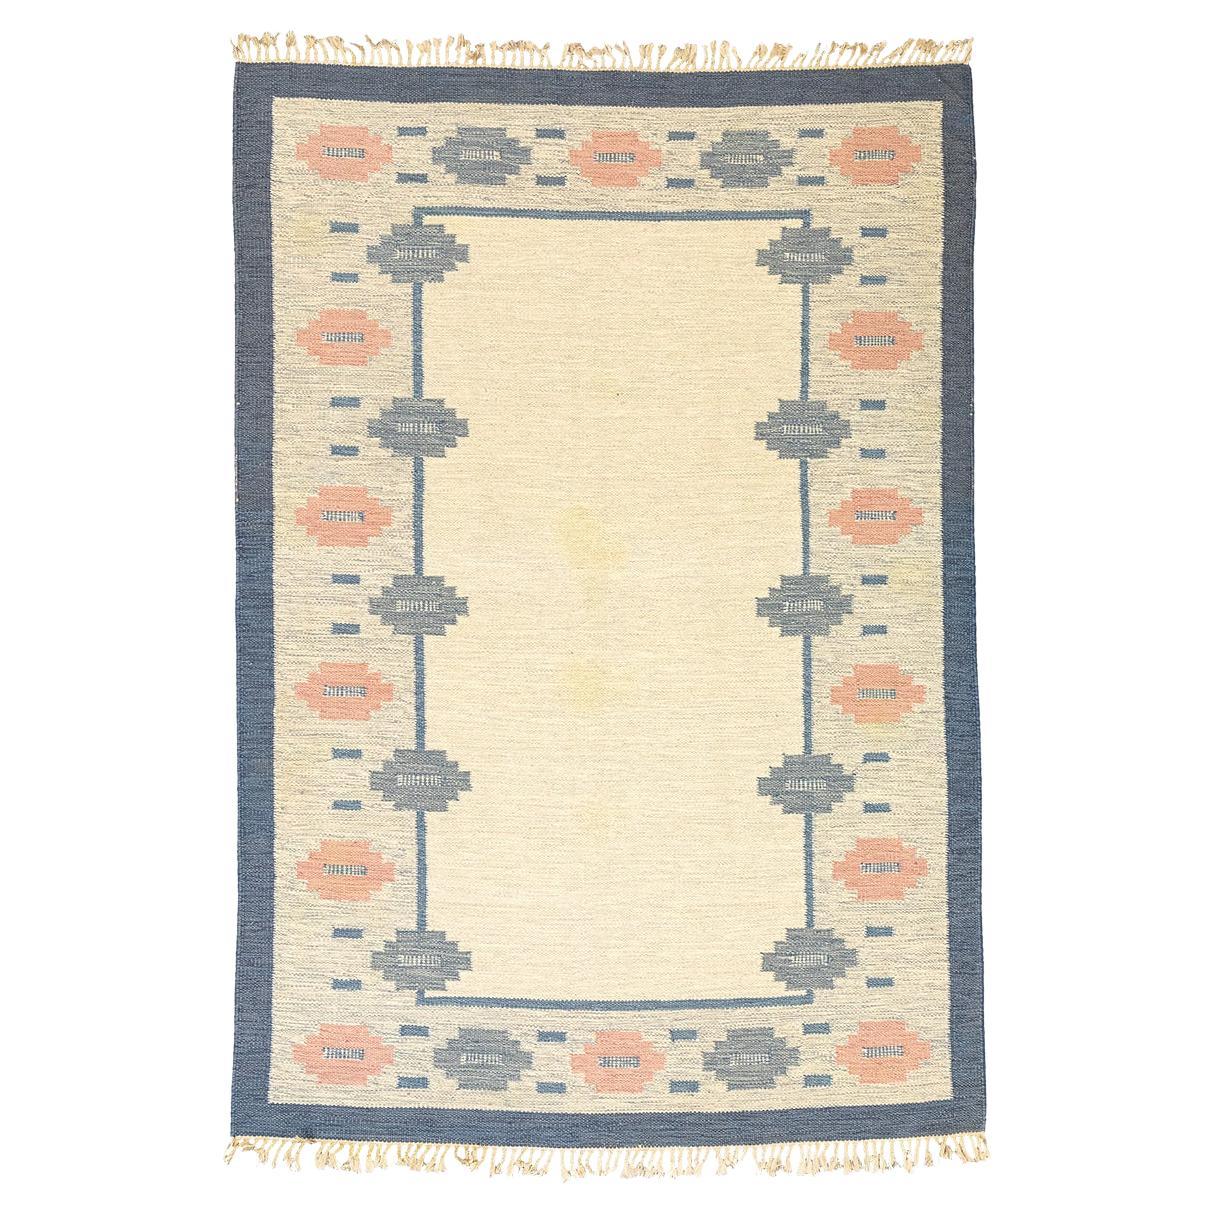 Rollakan Rug Swedish Abstract Design Soft Color Palette For Sale